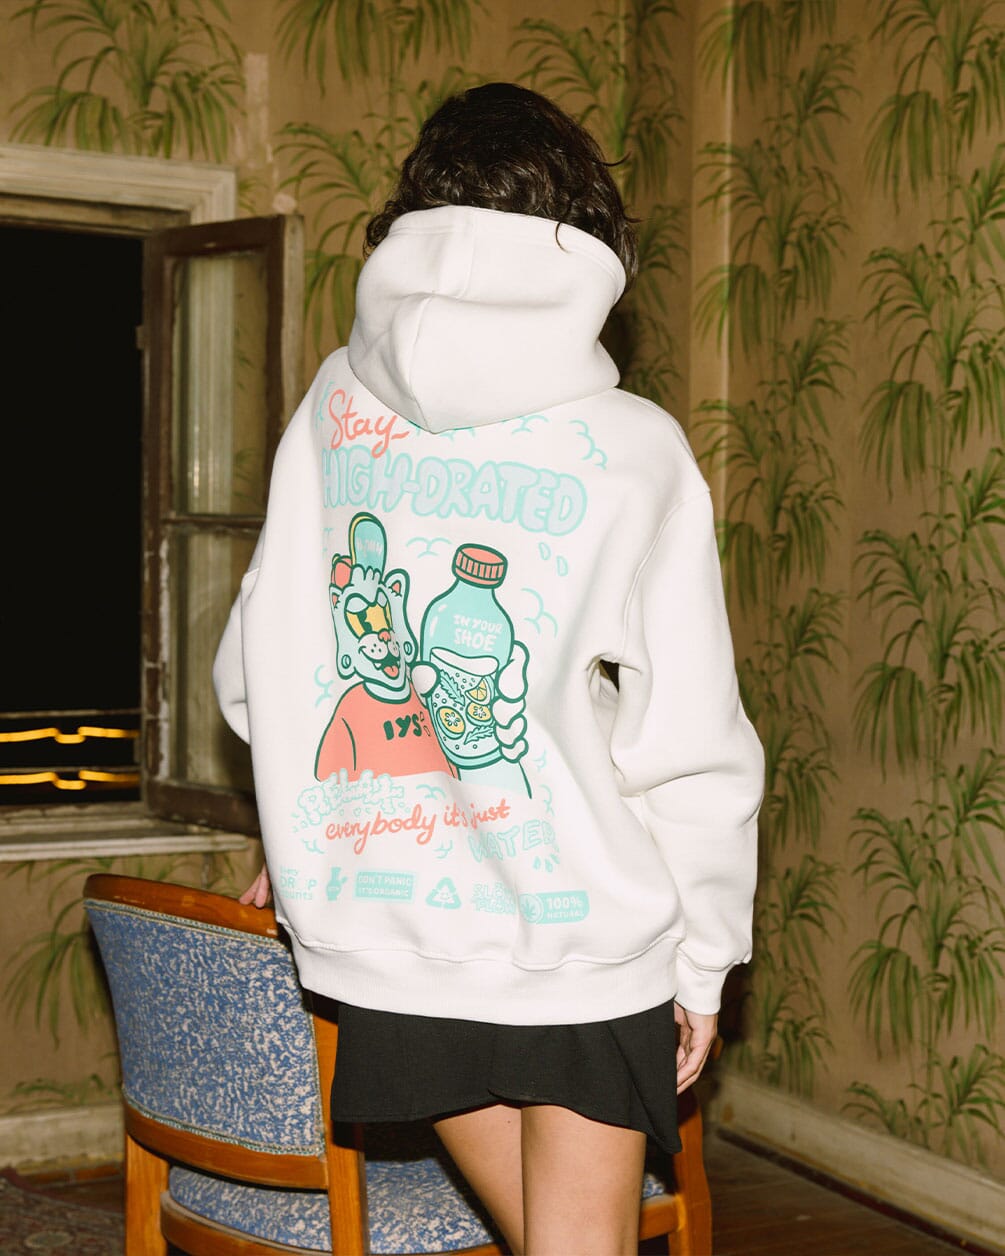 Stay Highdrated Hoodie Statement Hoodies IN YOUR SHOE 